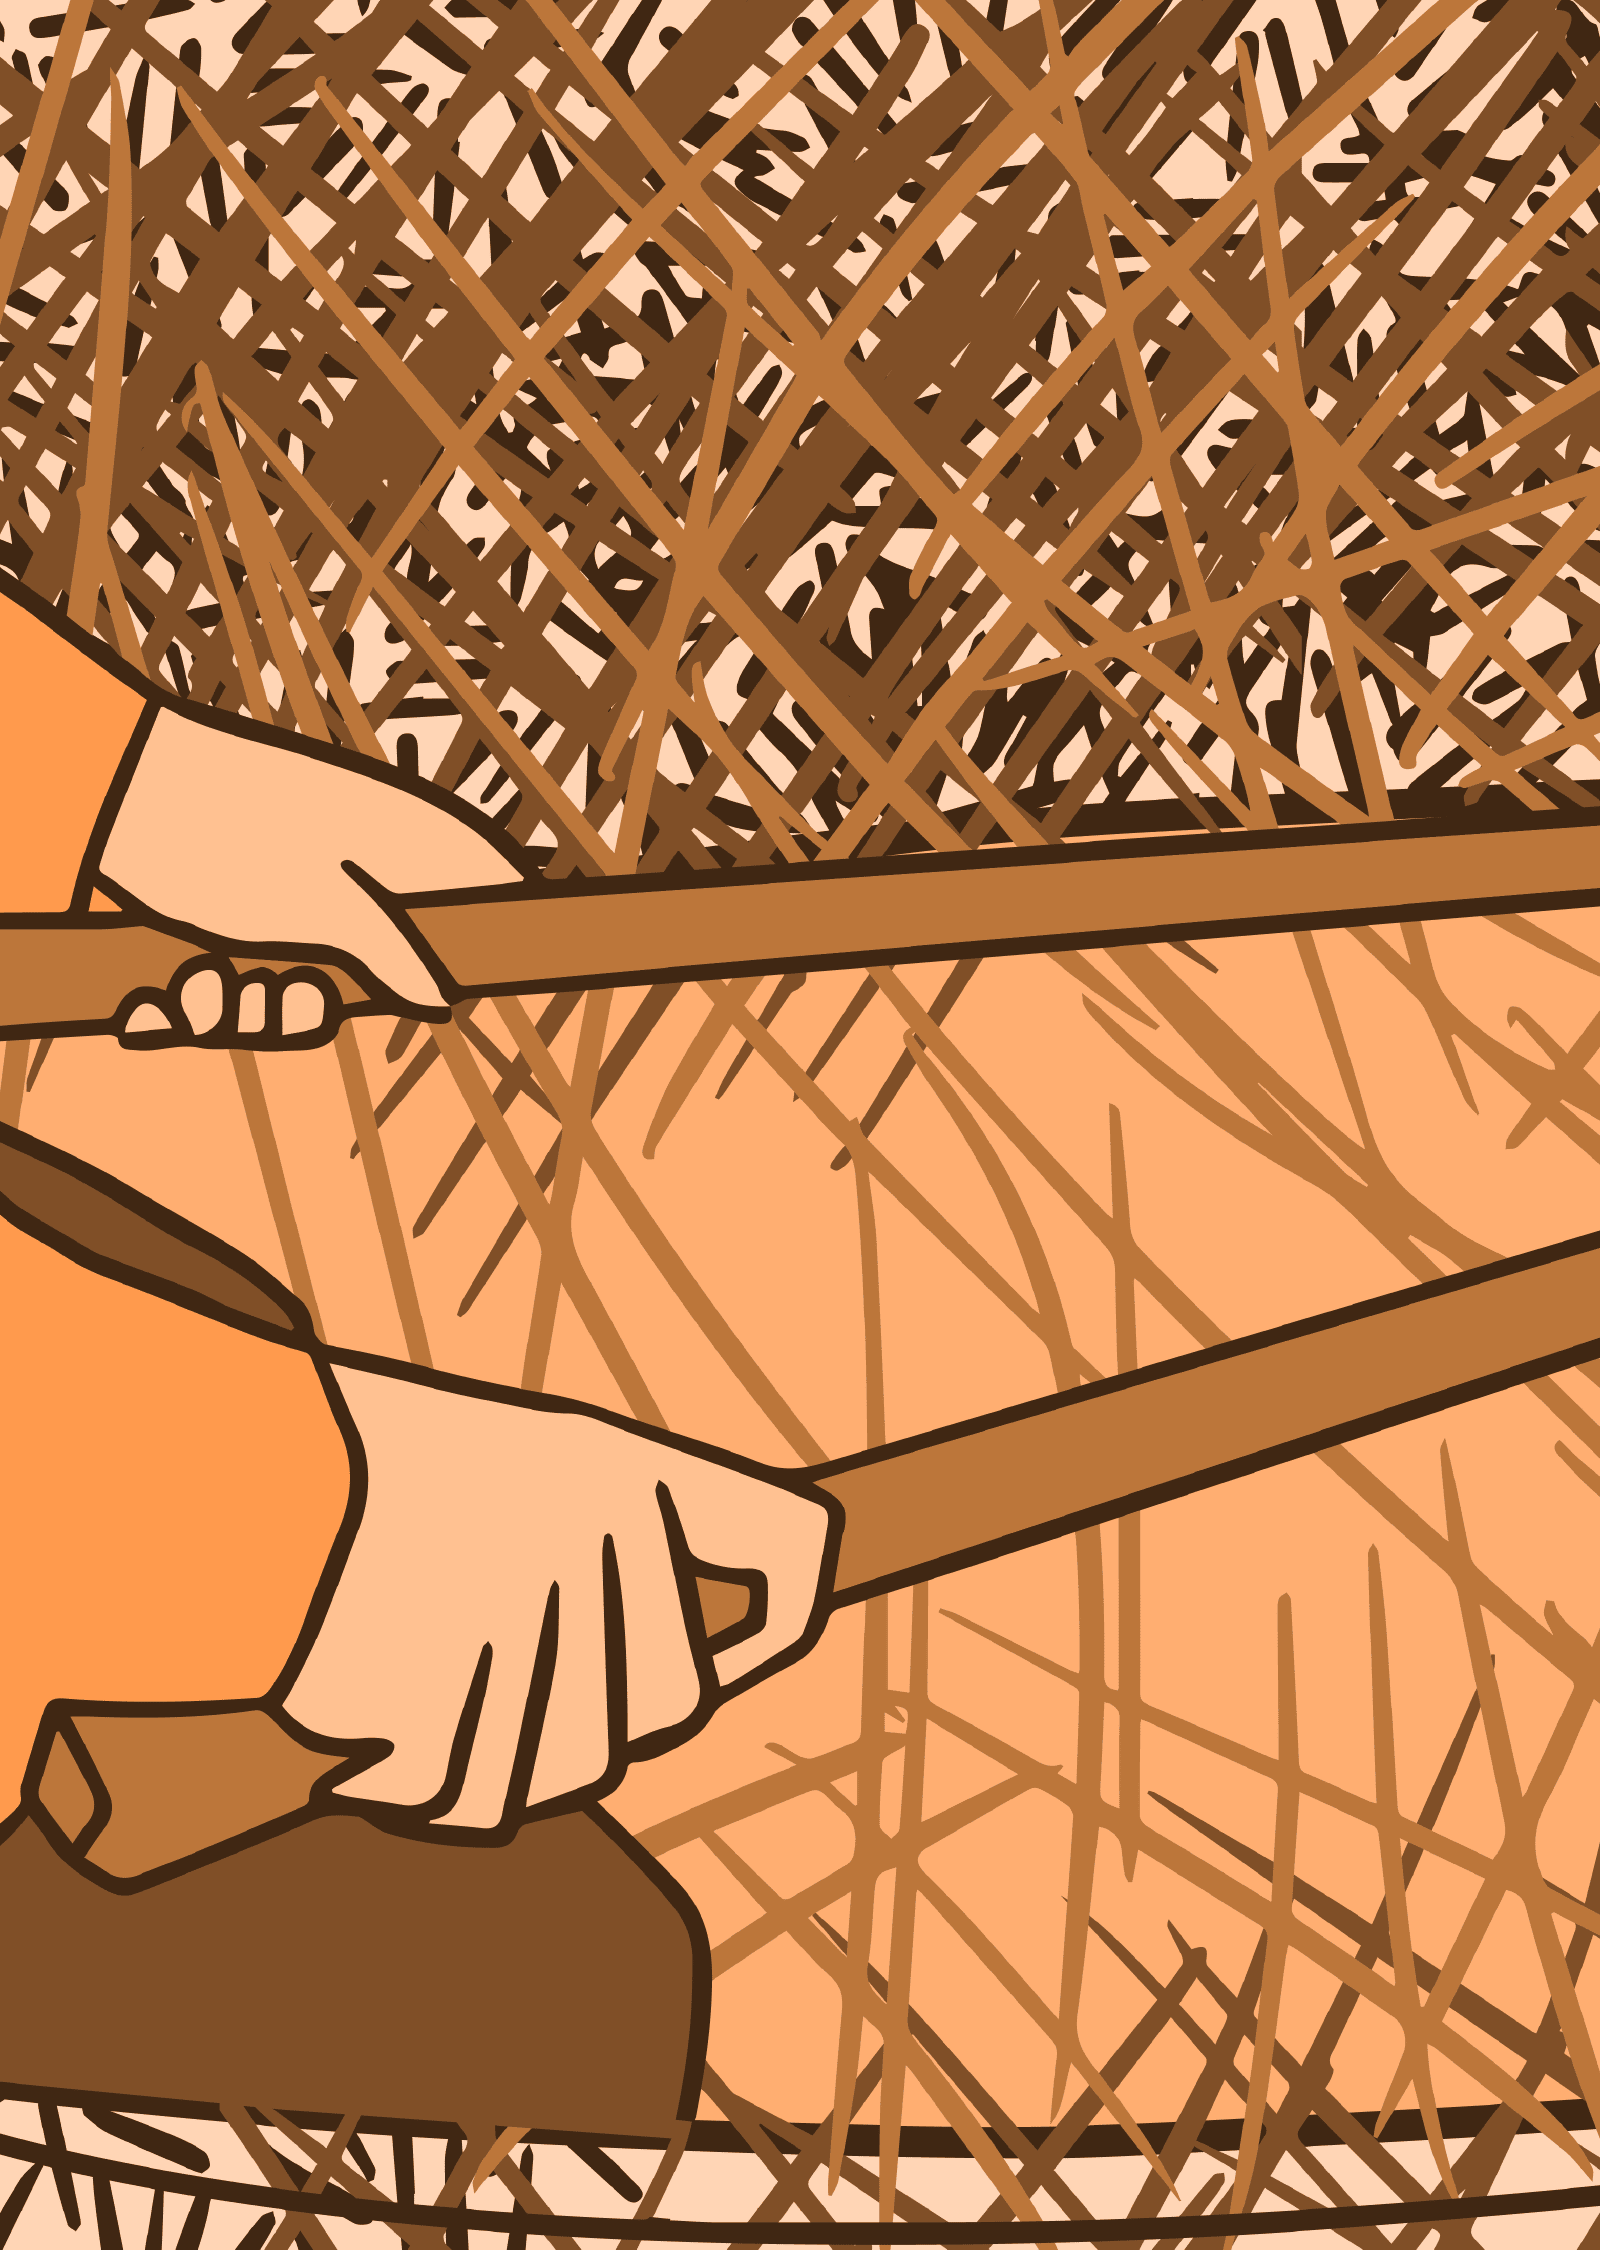 An illustration of someone ricing in a canoe in monochromatic orange